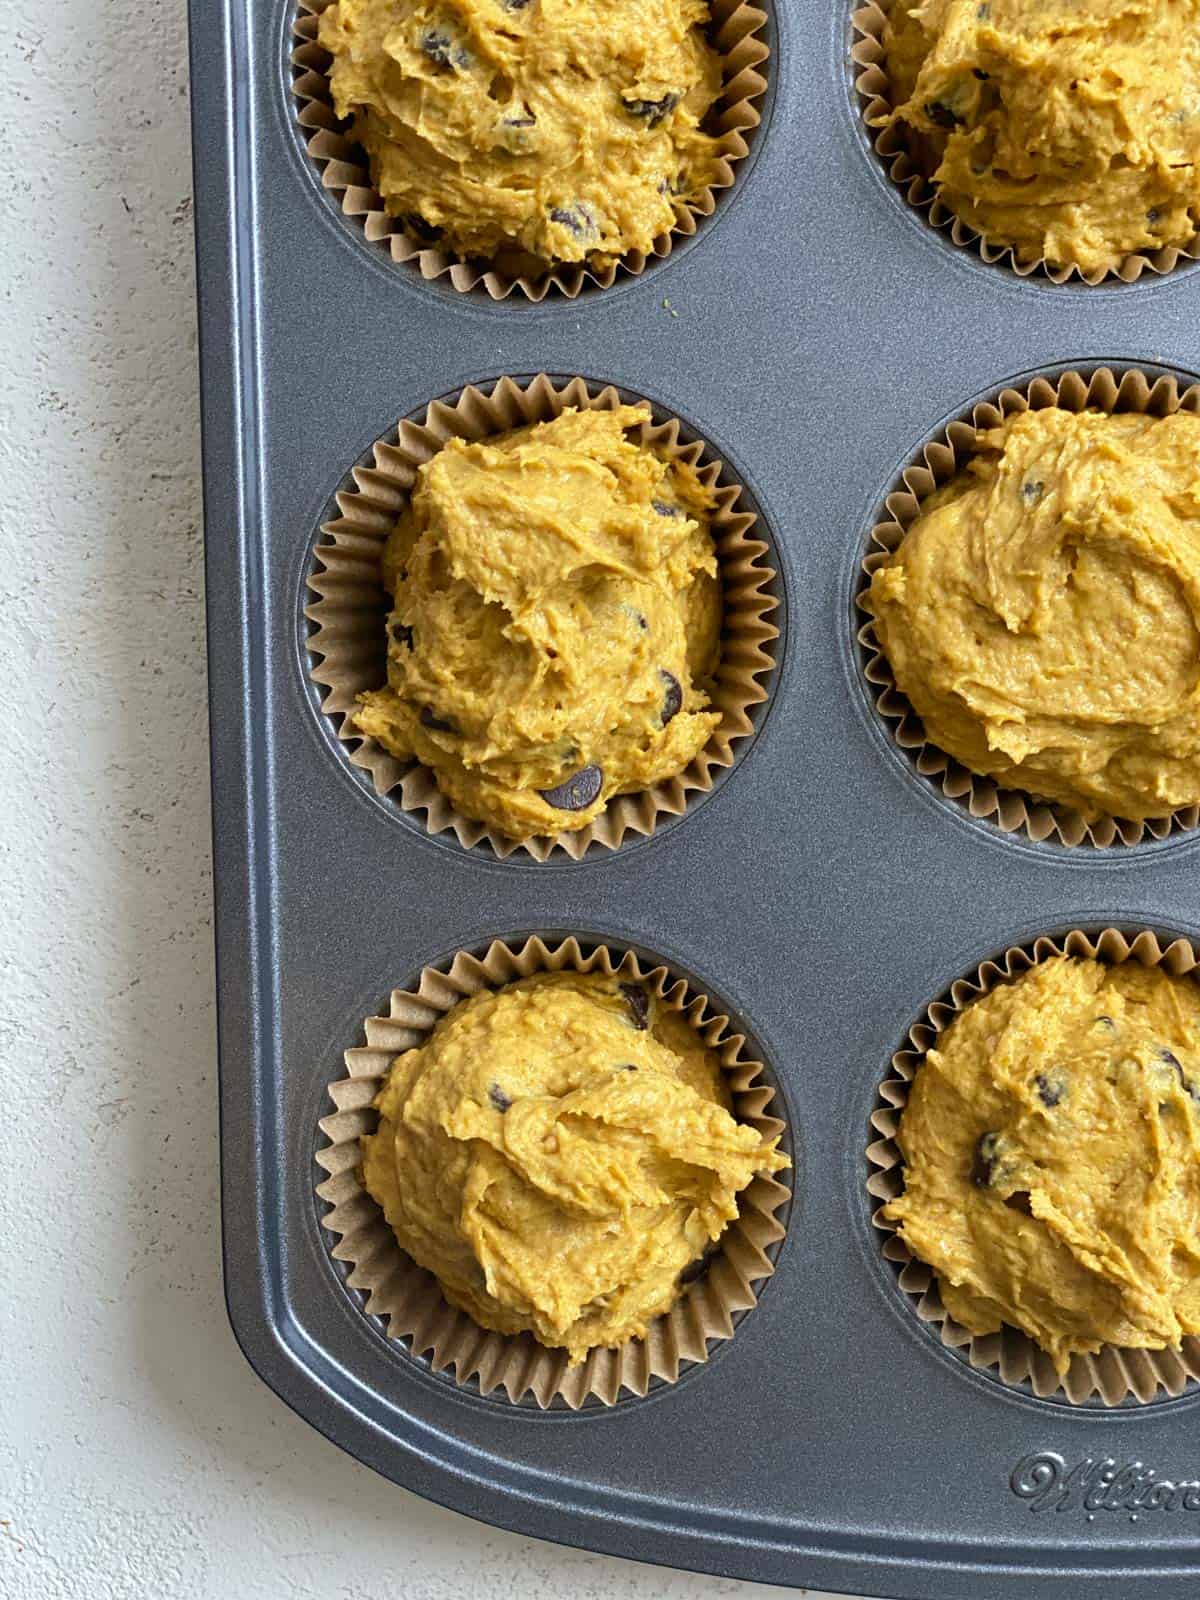 process of adding unbaked muffin batter to muffin tin